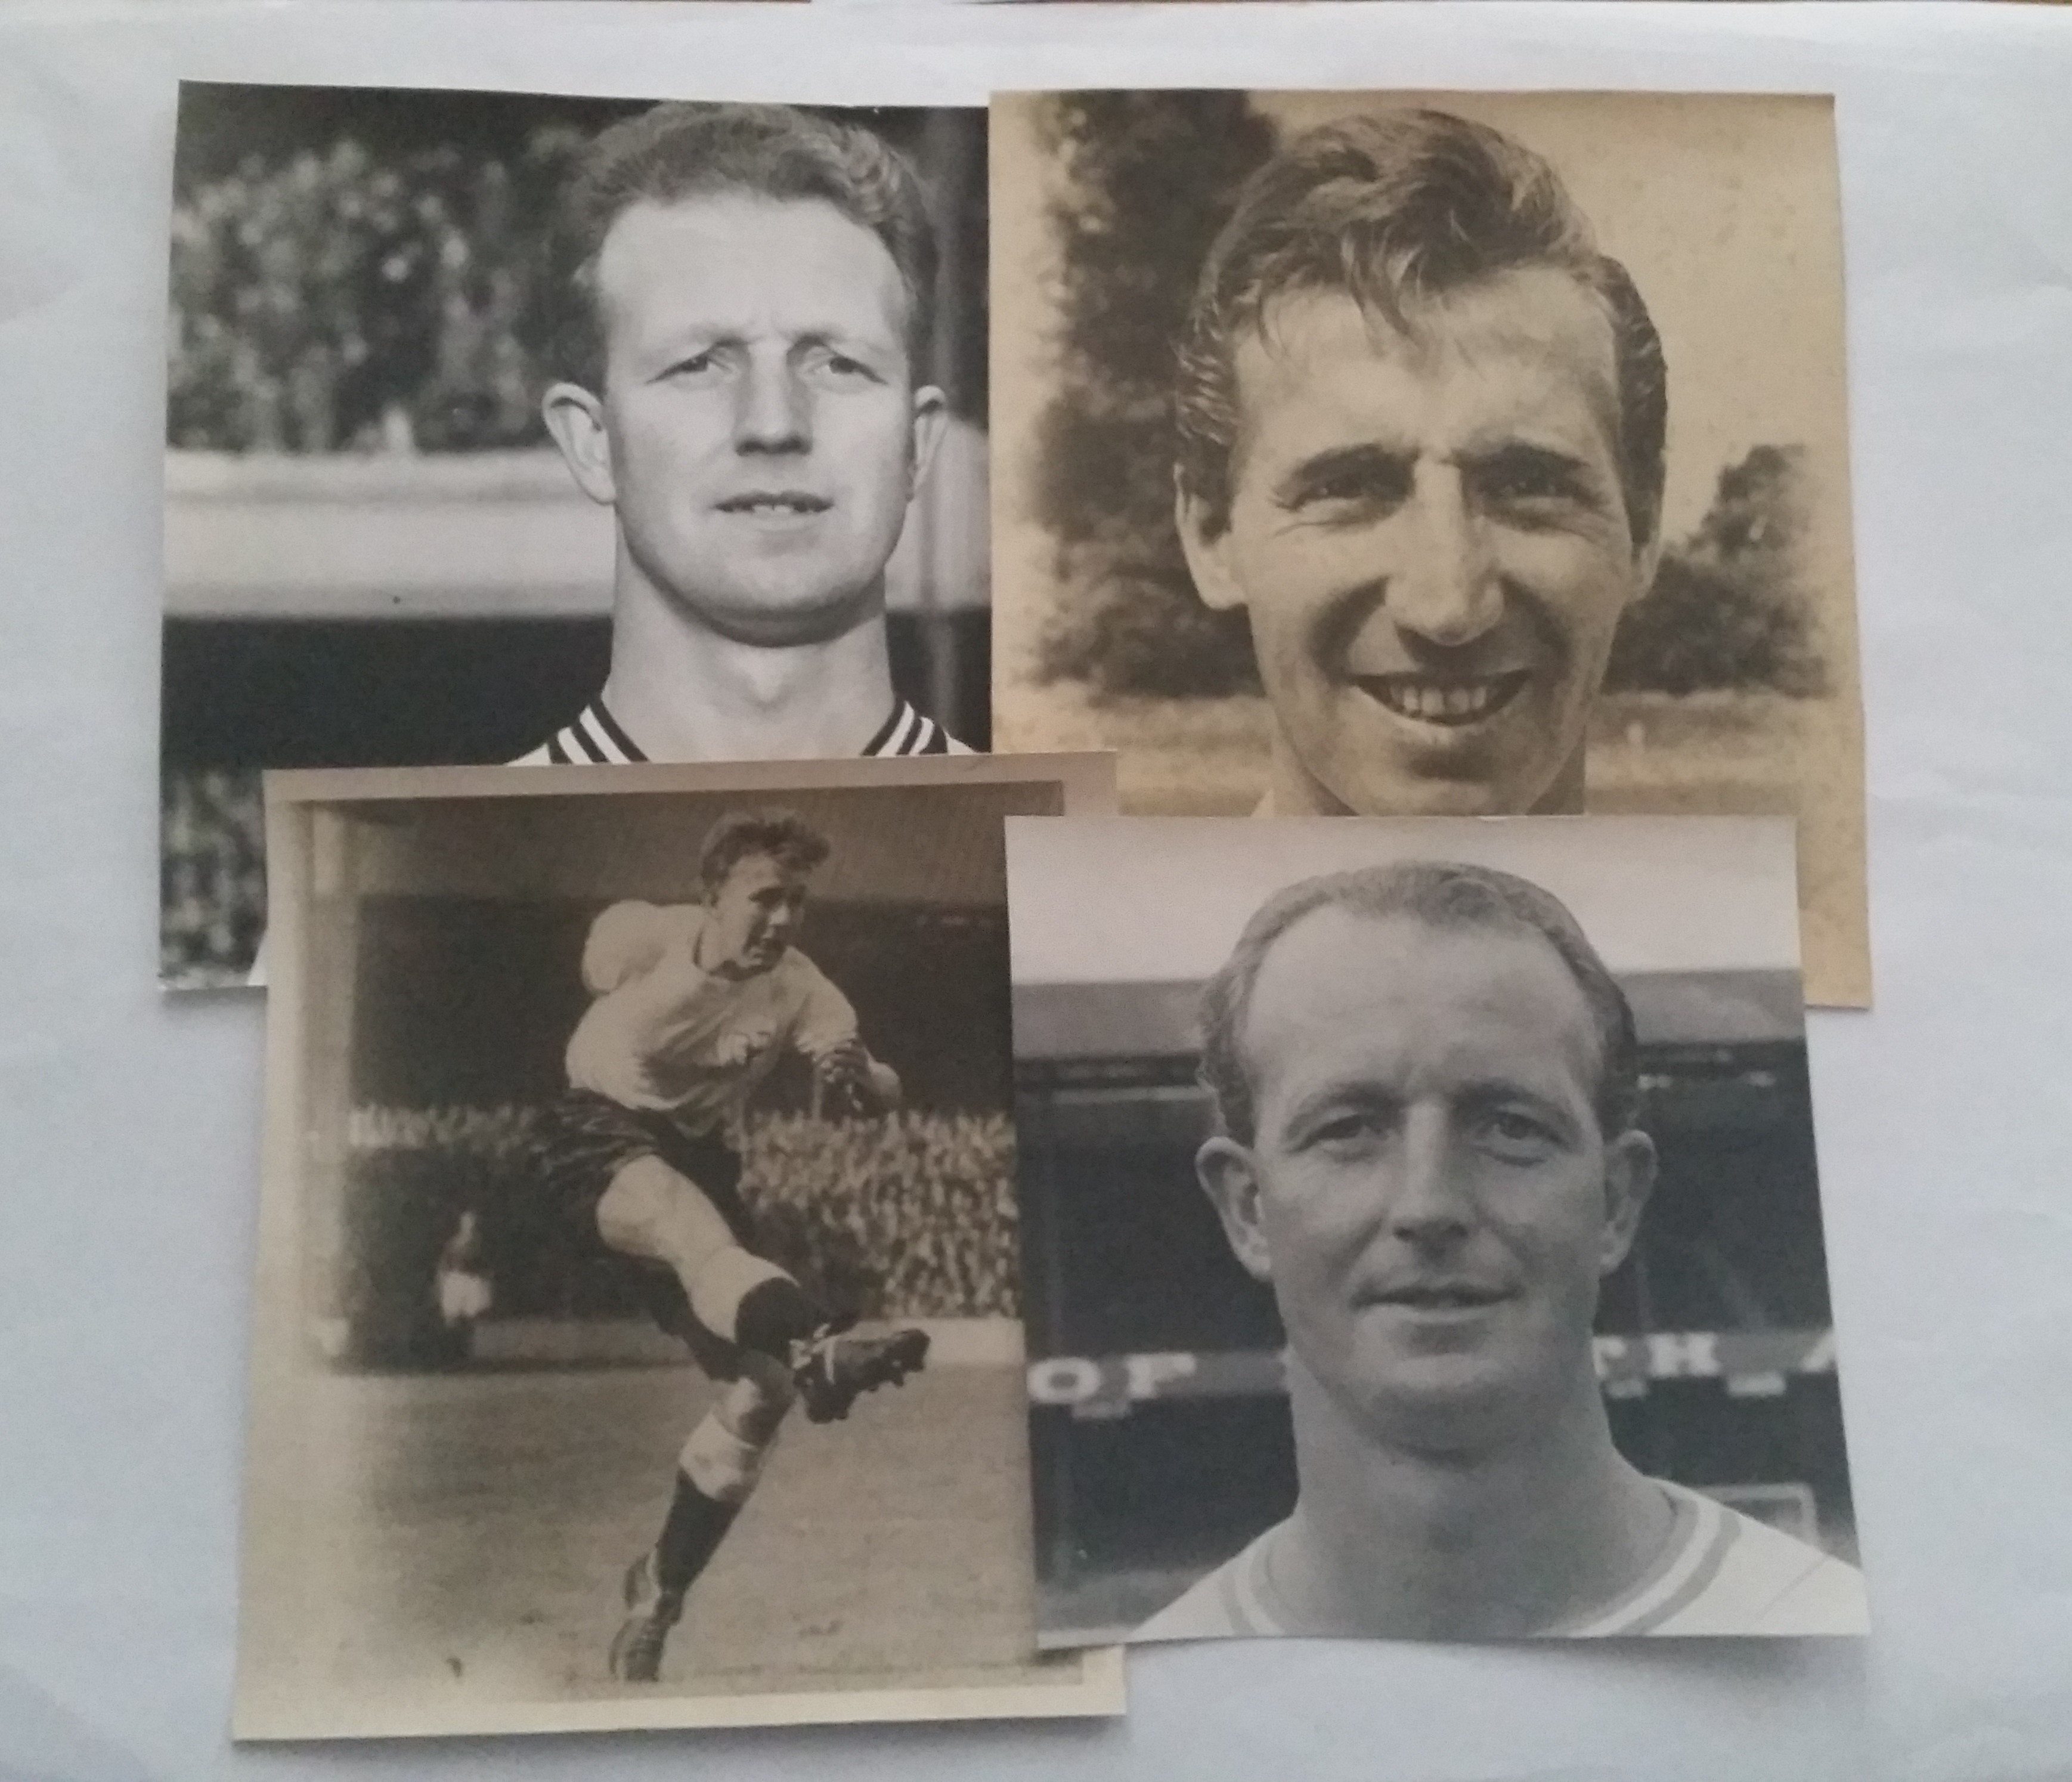 FOOTBALL, selection of original b/w photographs, all players who joined Swansea City at some point